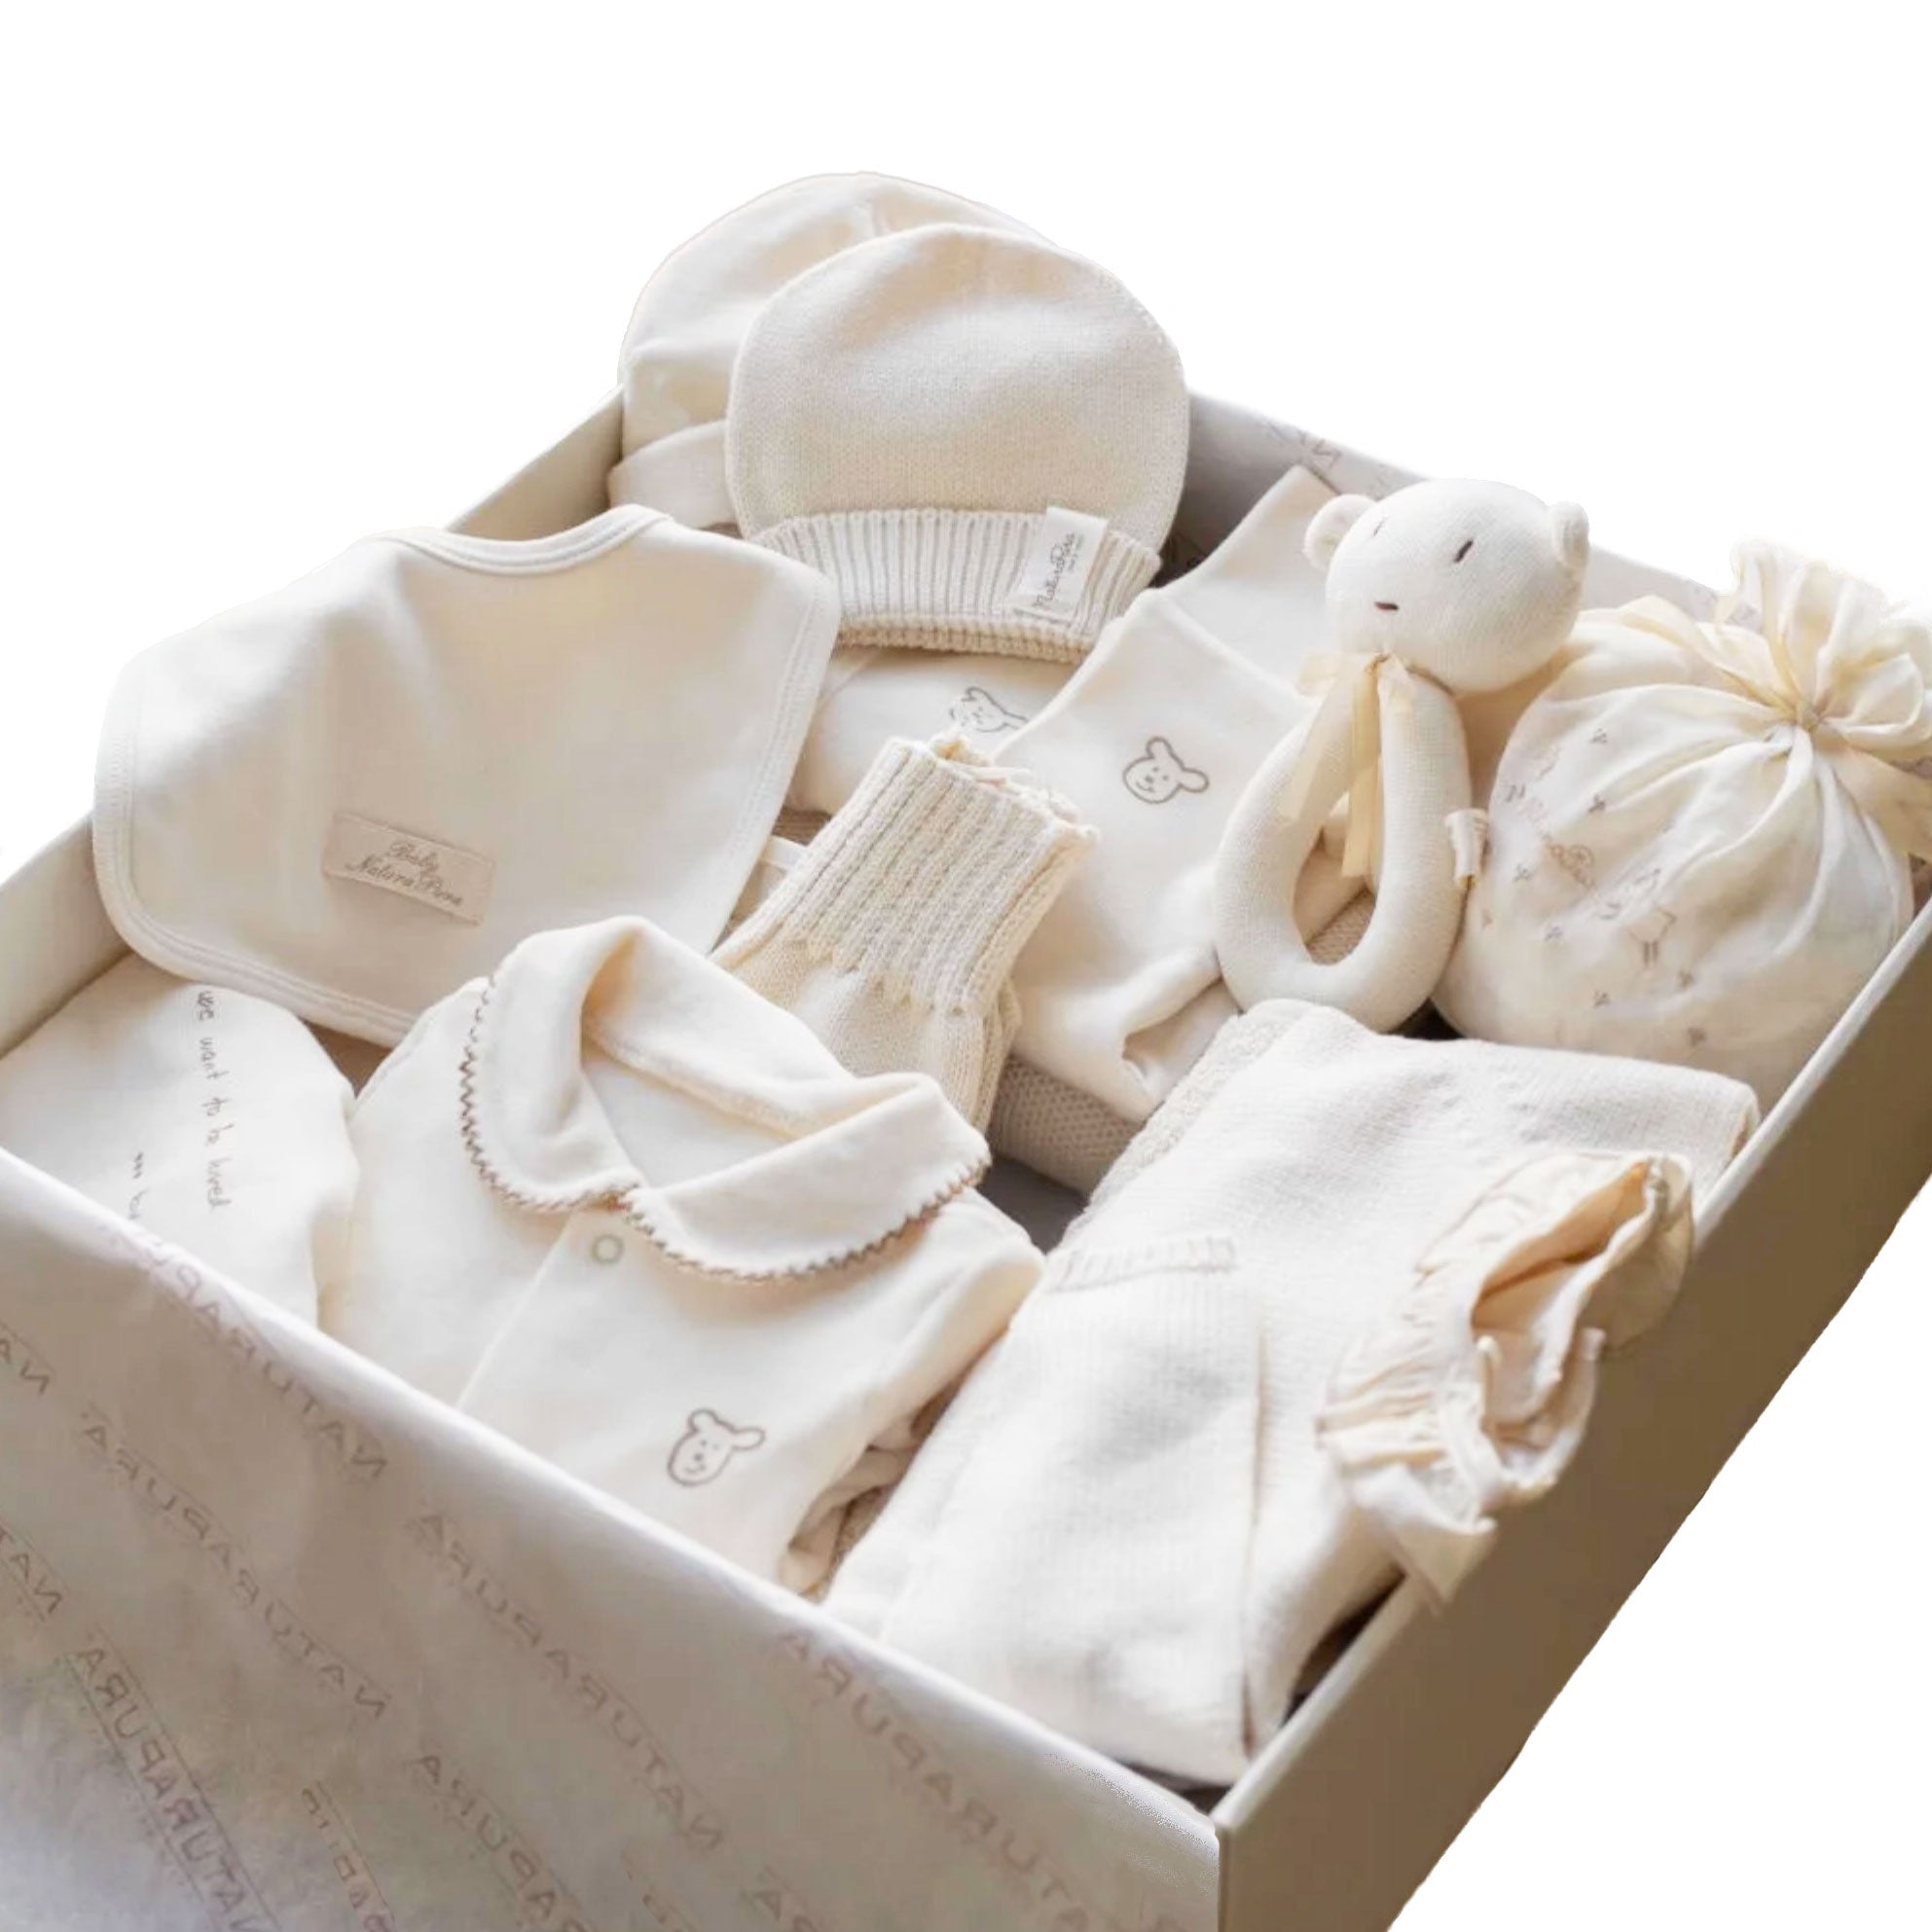 Luxury Organic Cotton 19 pieces baby gift box by Naturapura at Bonjour Baby Baskets